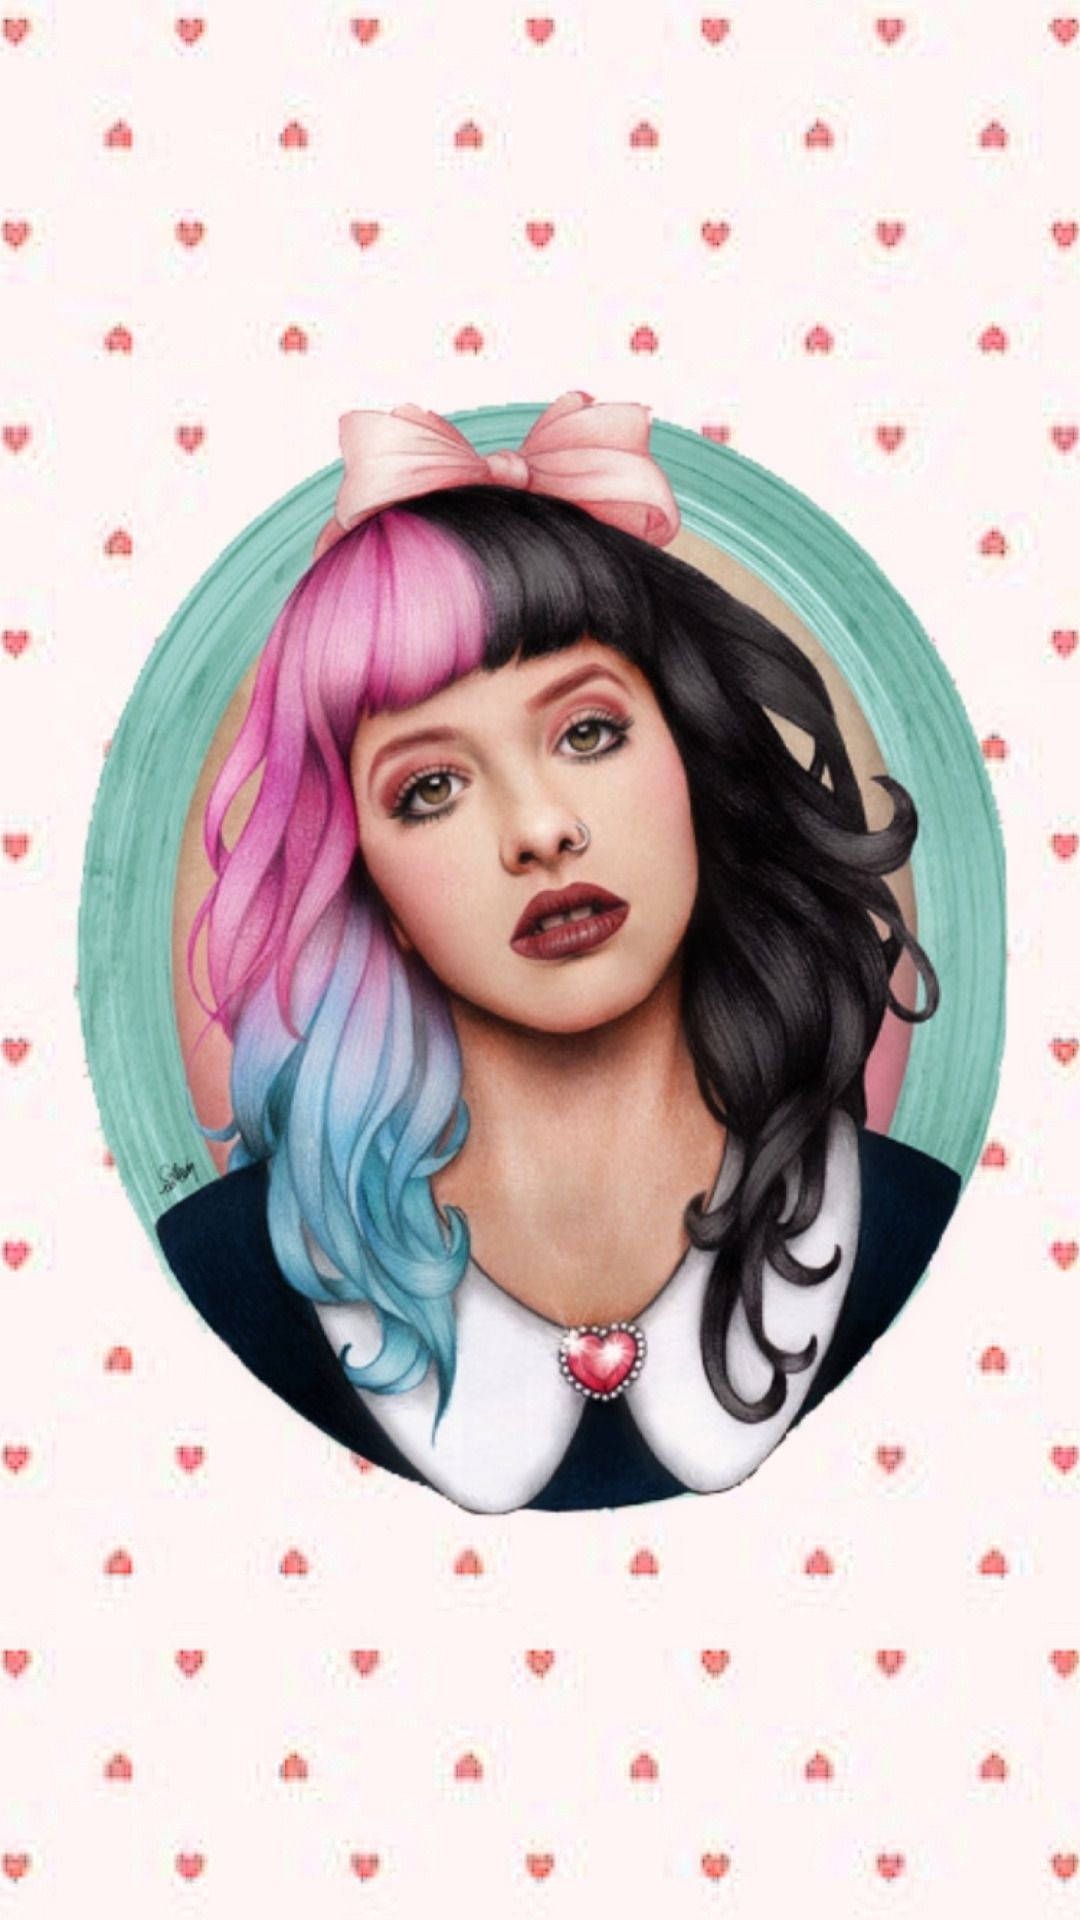 A girl with pink and blue hair in front of hearts - Melanie Martinez